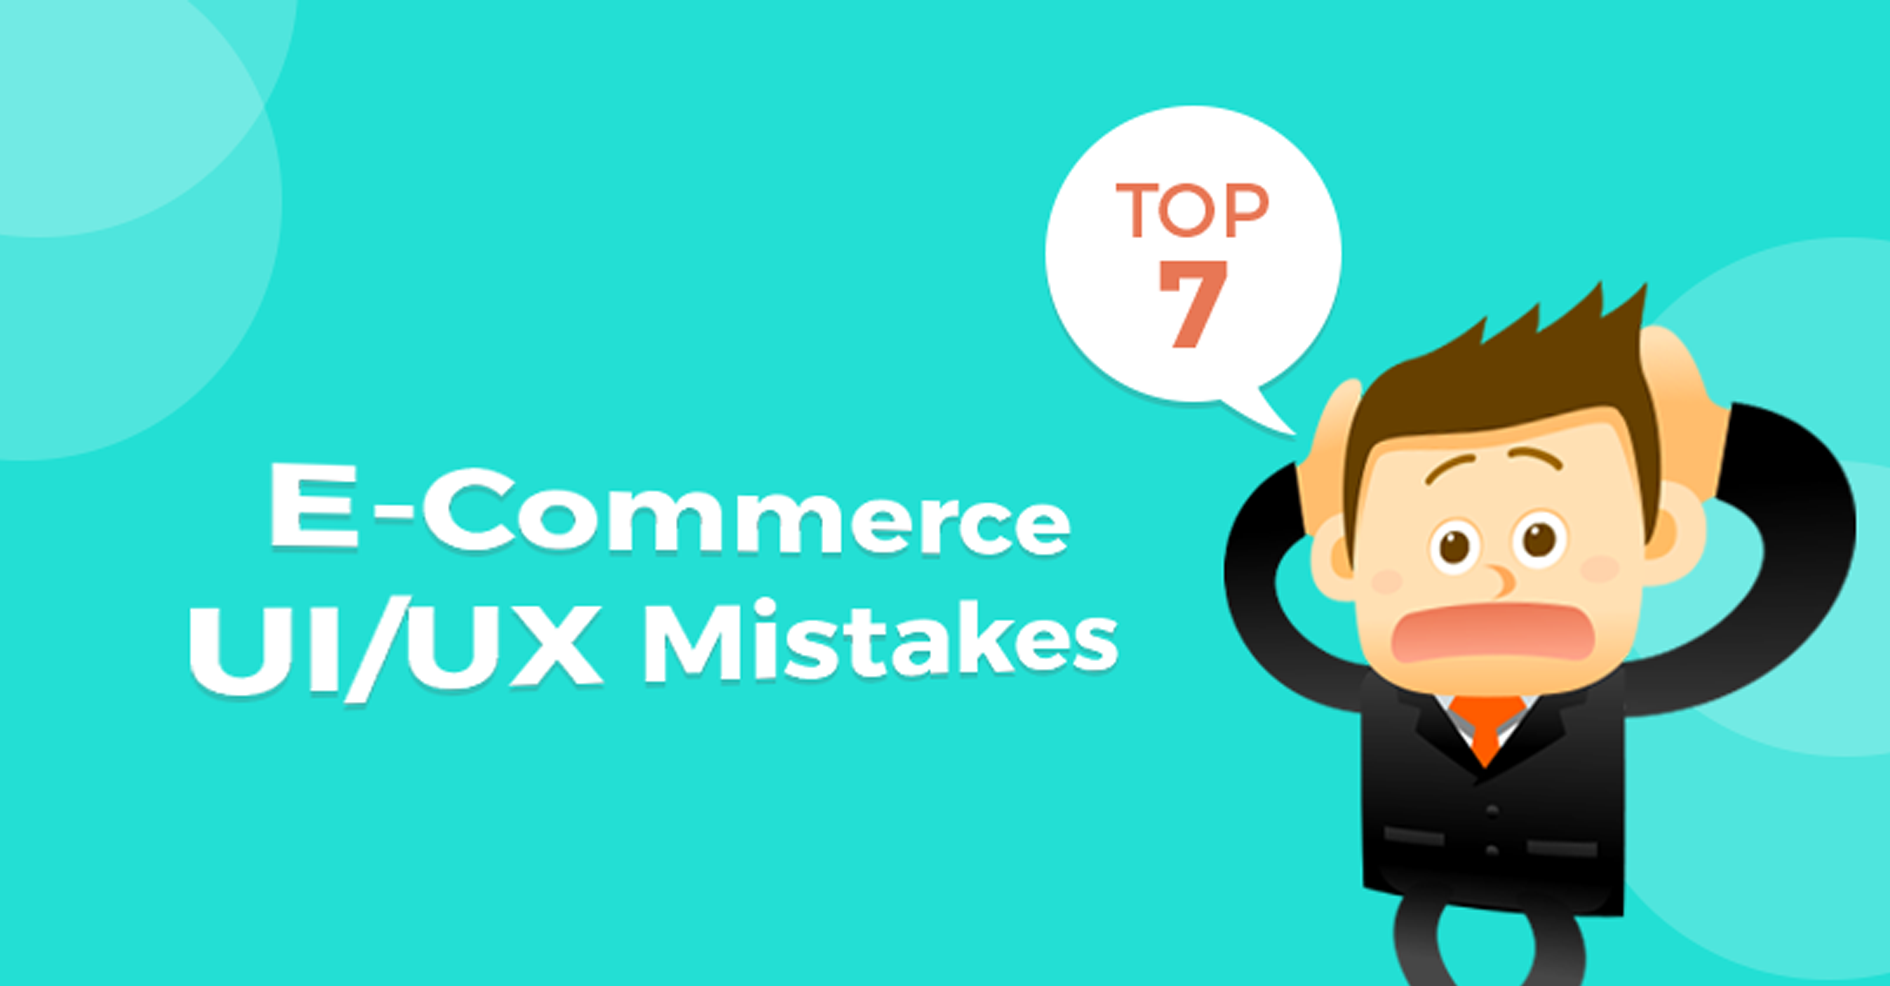 E-Commerce UI/UX Mistakes You Should Avoid